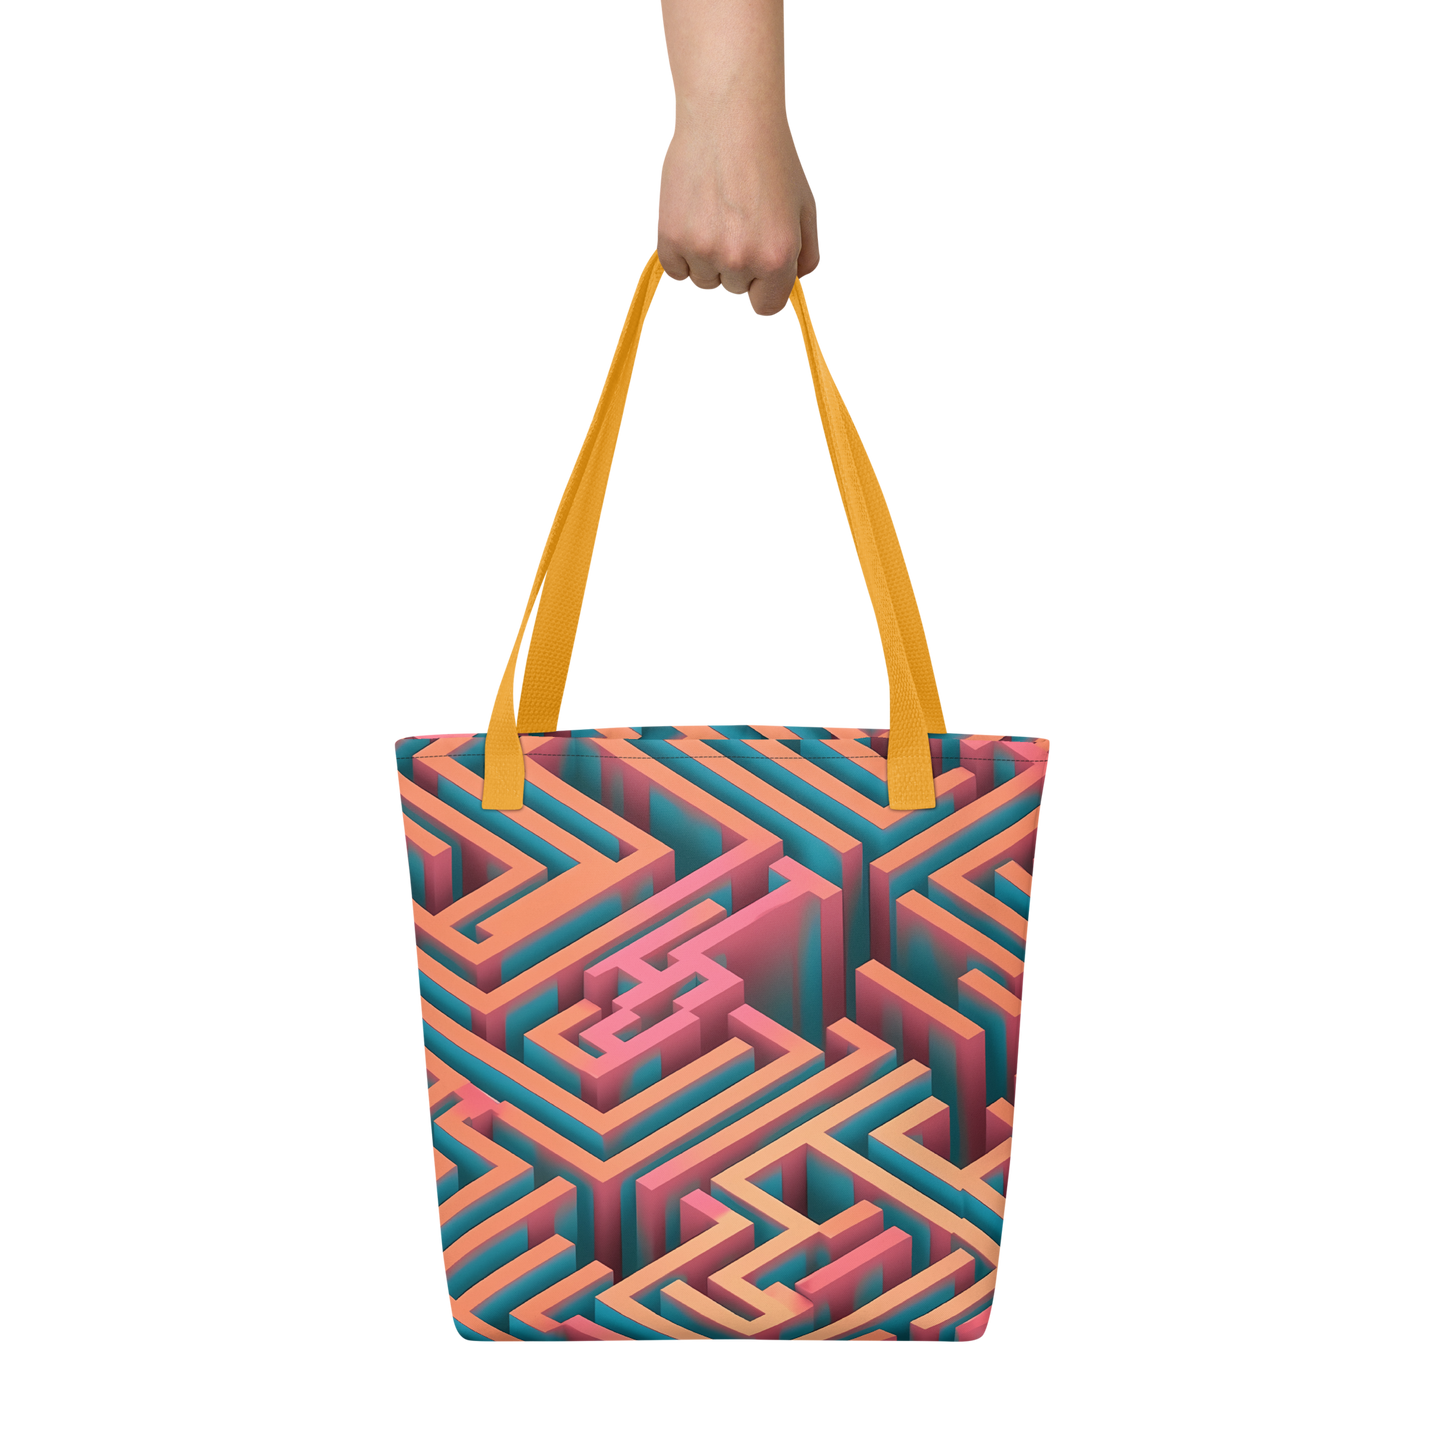 3D Maze Illusion | 3D Patterns | All-Over Print Tote - #1